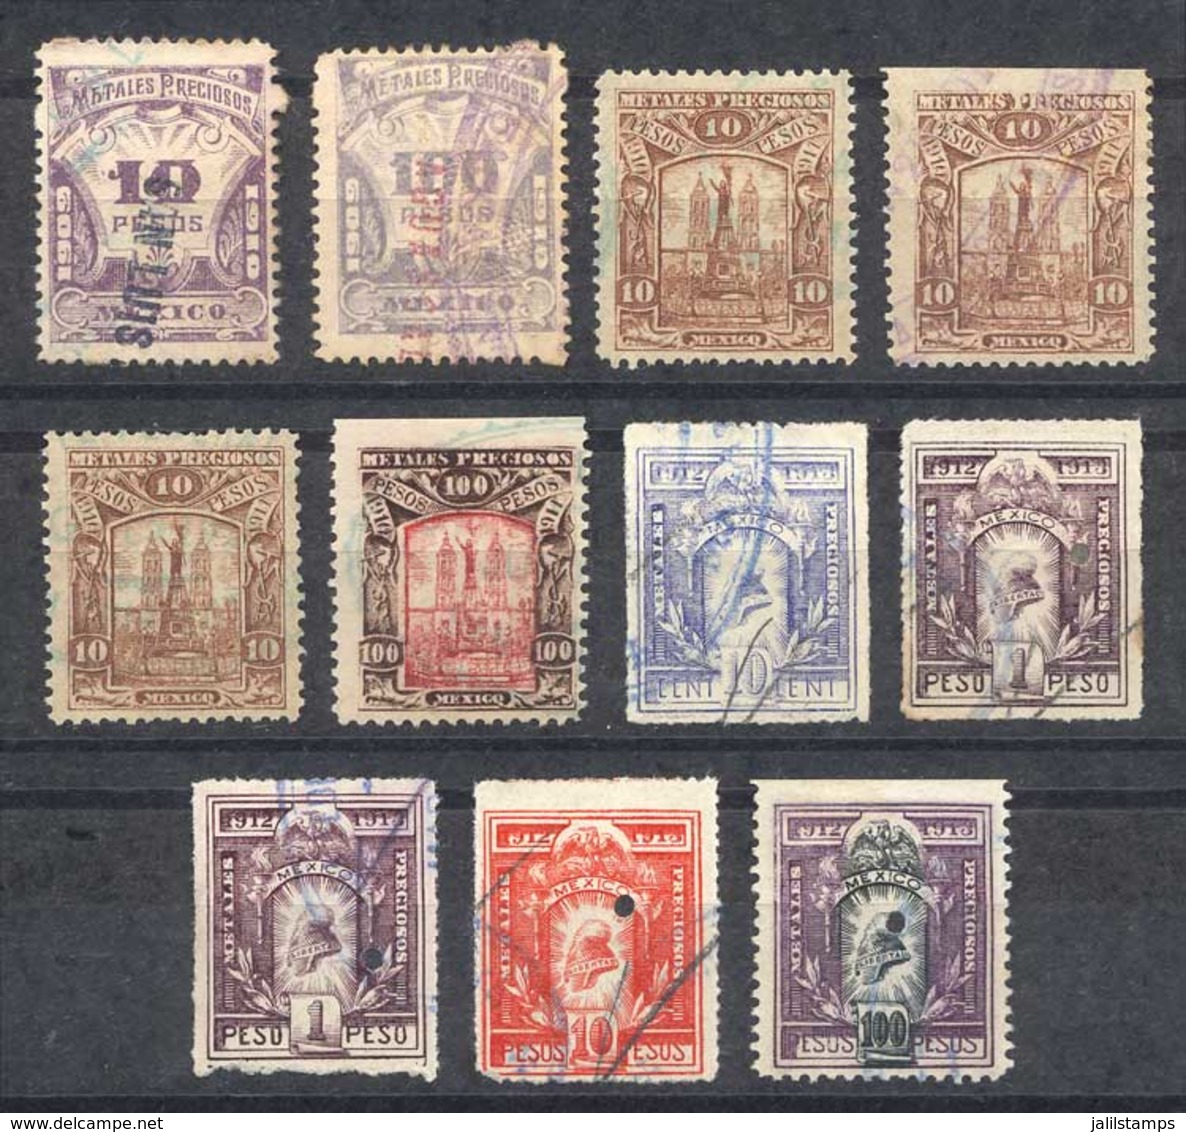 MEXICO: PRECIOUS METALS: Years 1909/12, 11 Stamps Between 10c. And $100, Fine General Quality, Rare! - Mexico